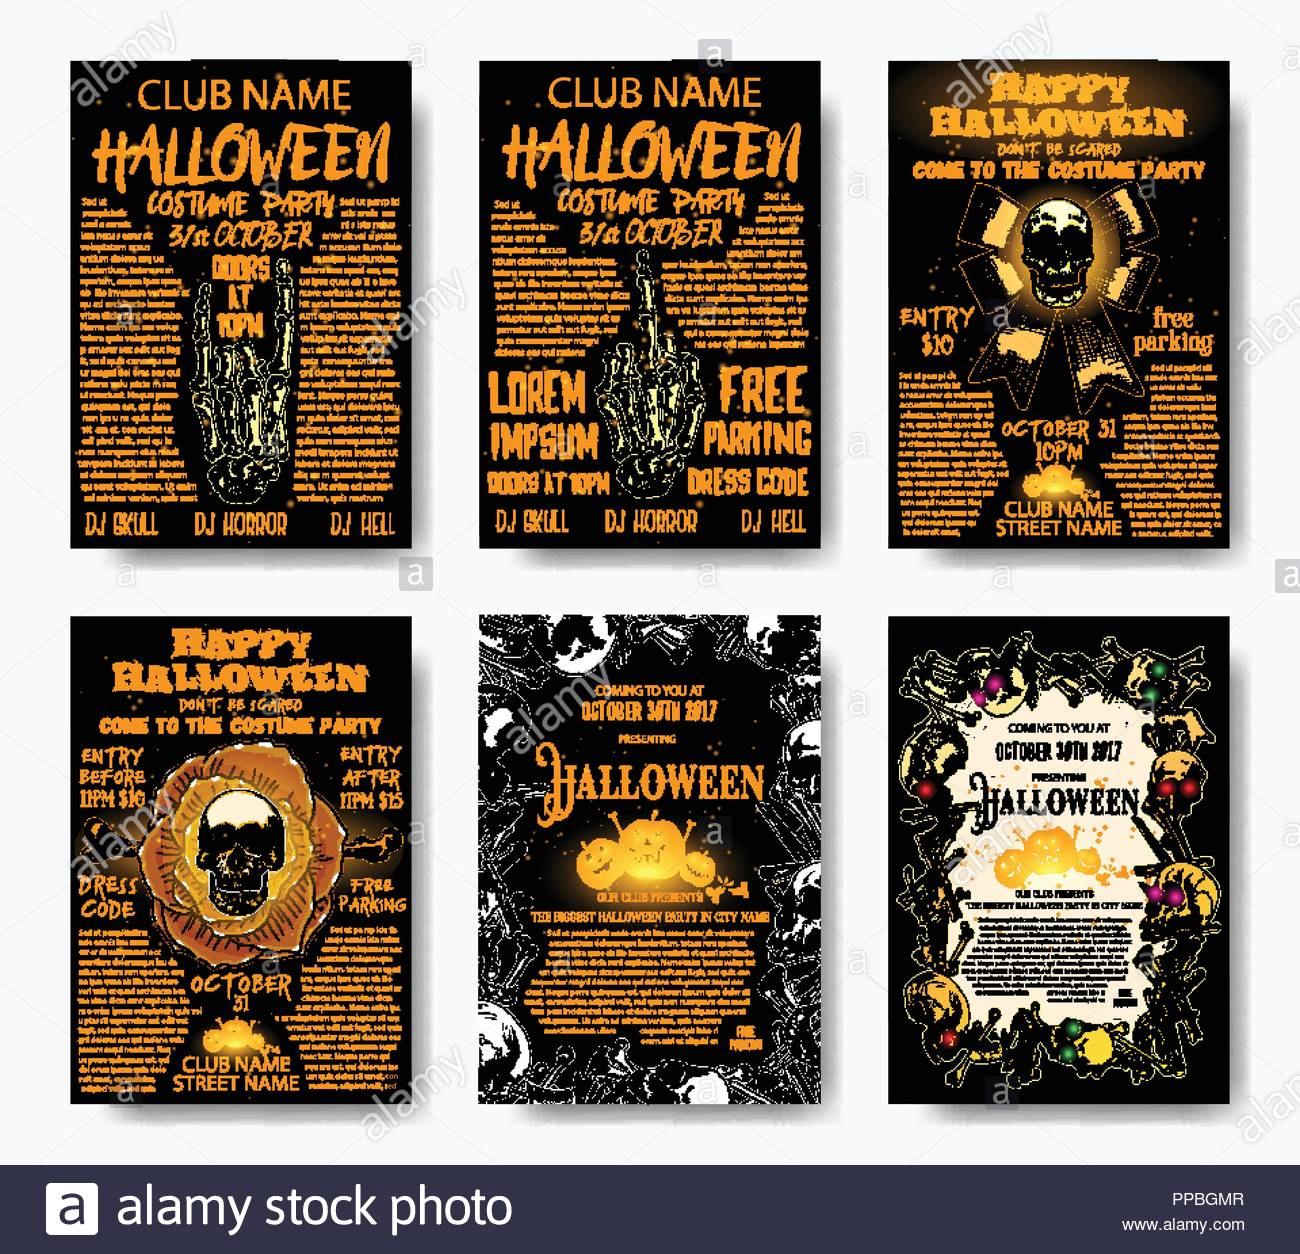 Halloween Costume Party Invitation And Greeting Card Set In Halloween Costume Party Flyer Templates